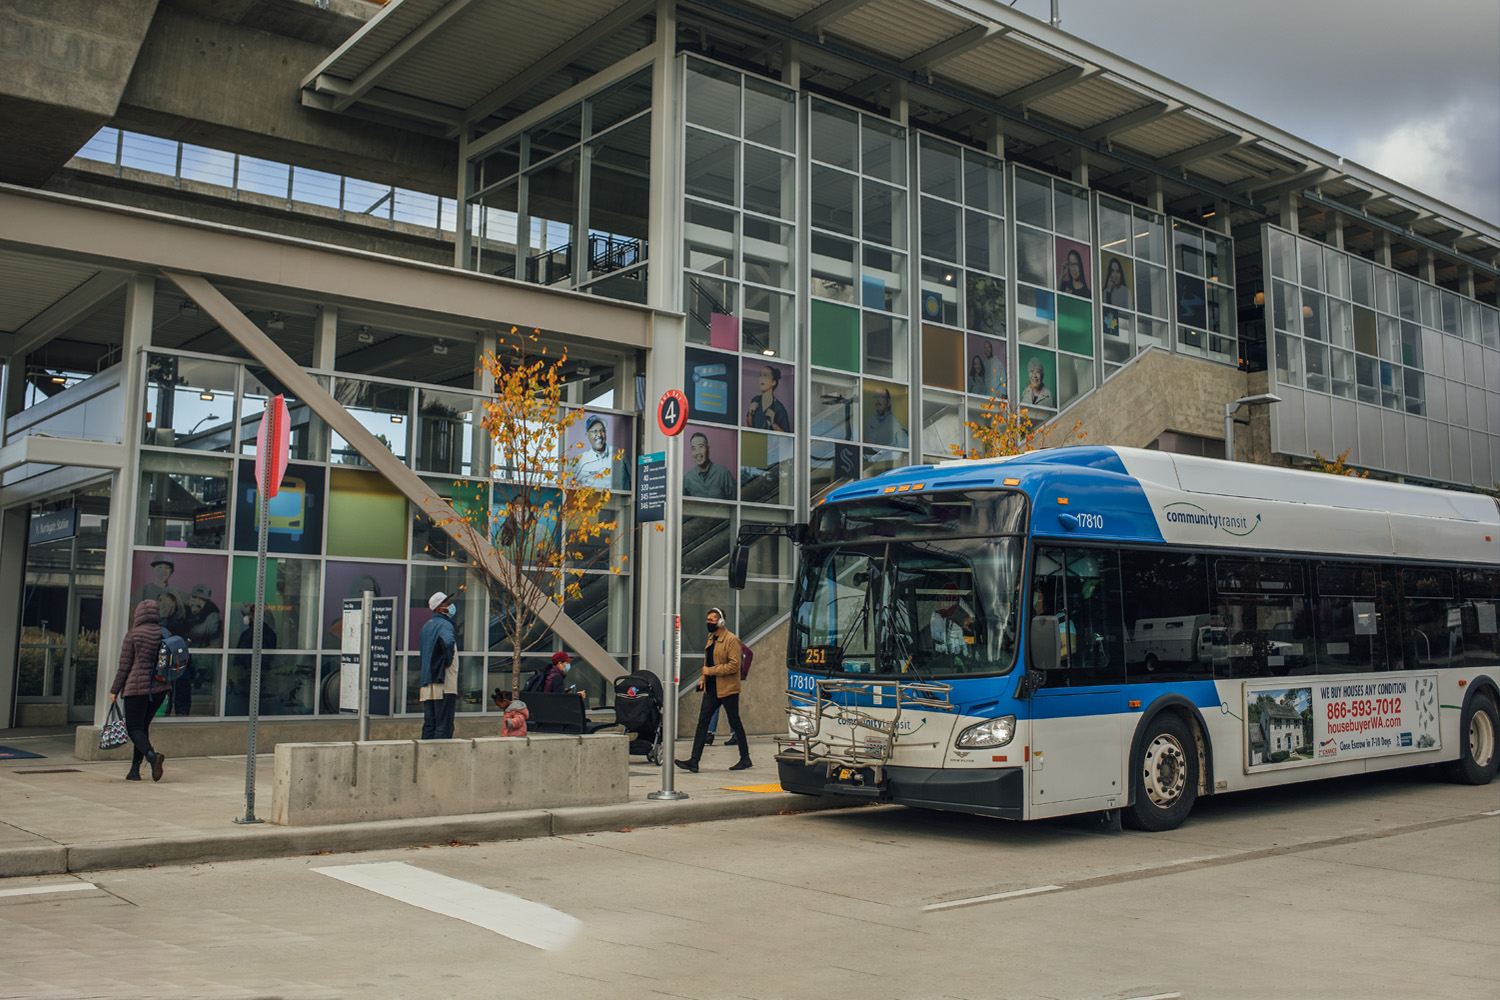 A Community Transit bus is parked outside the Link Northgate Station.